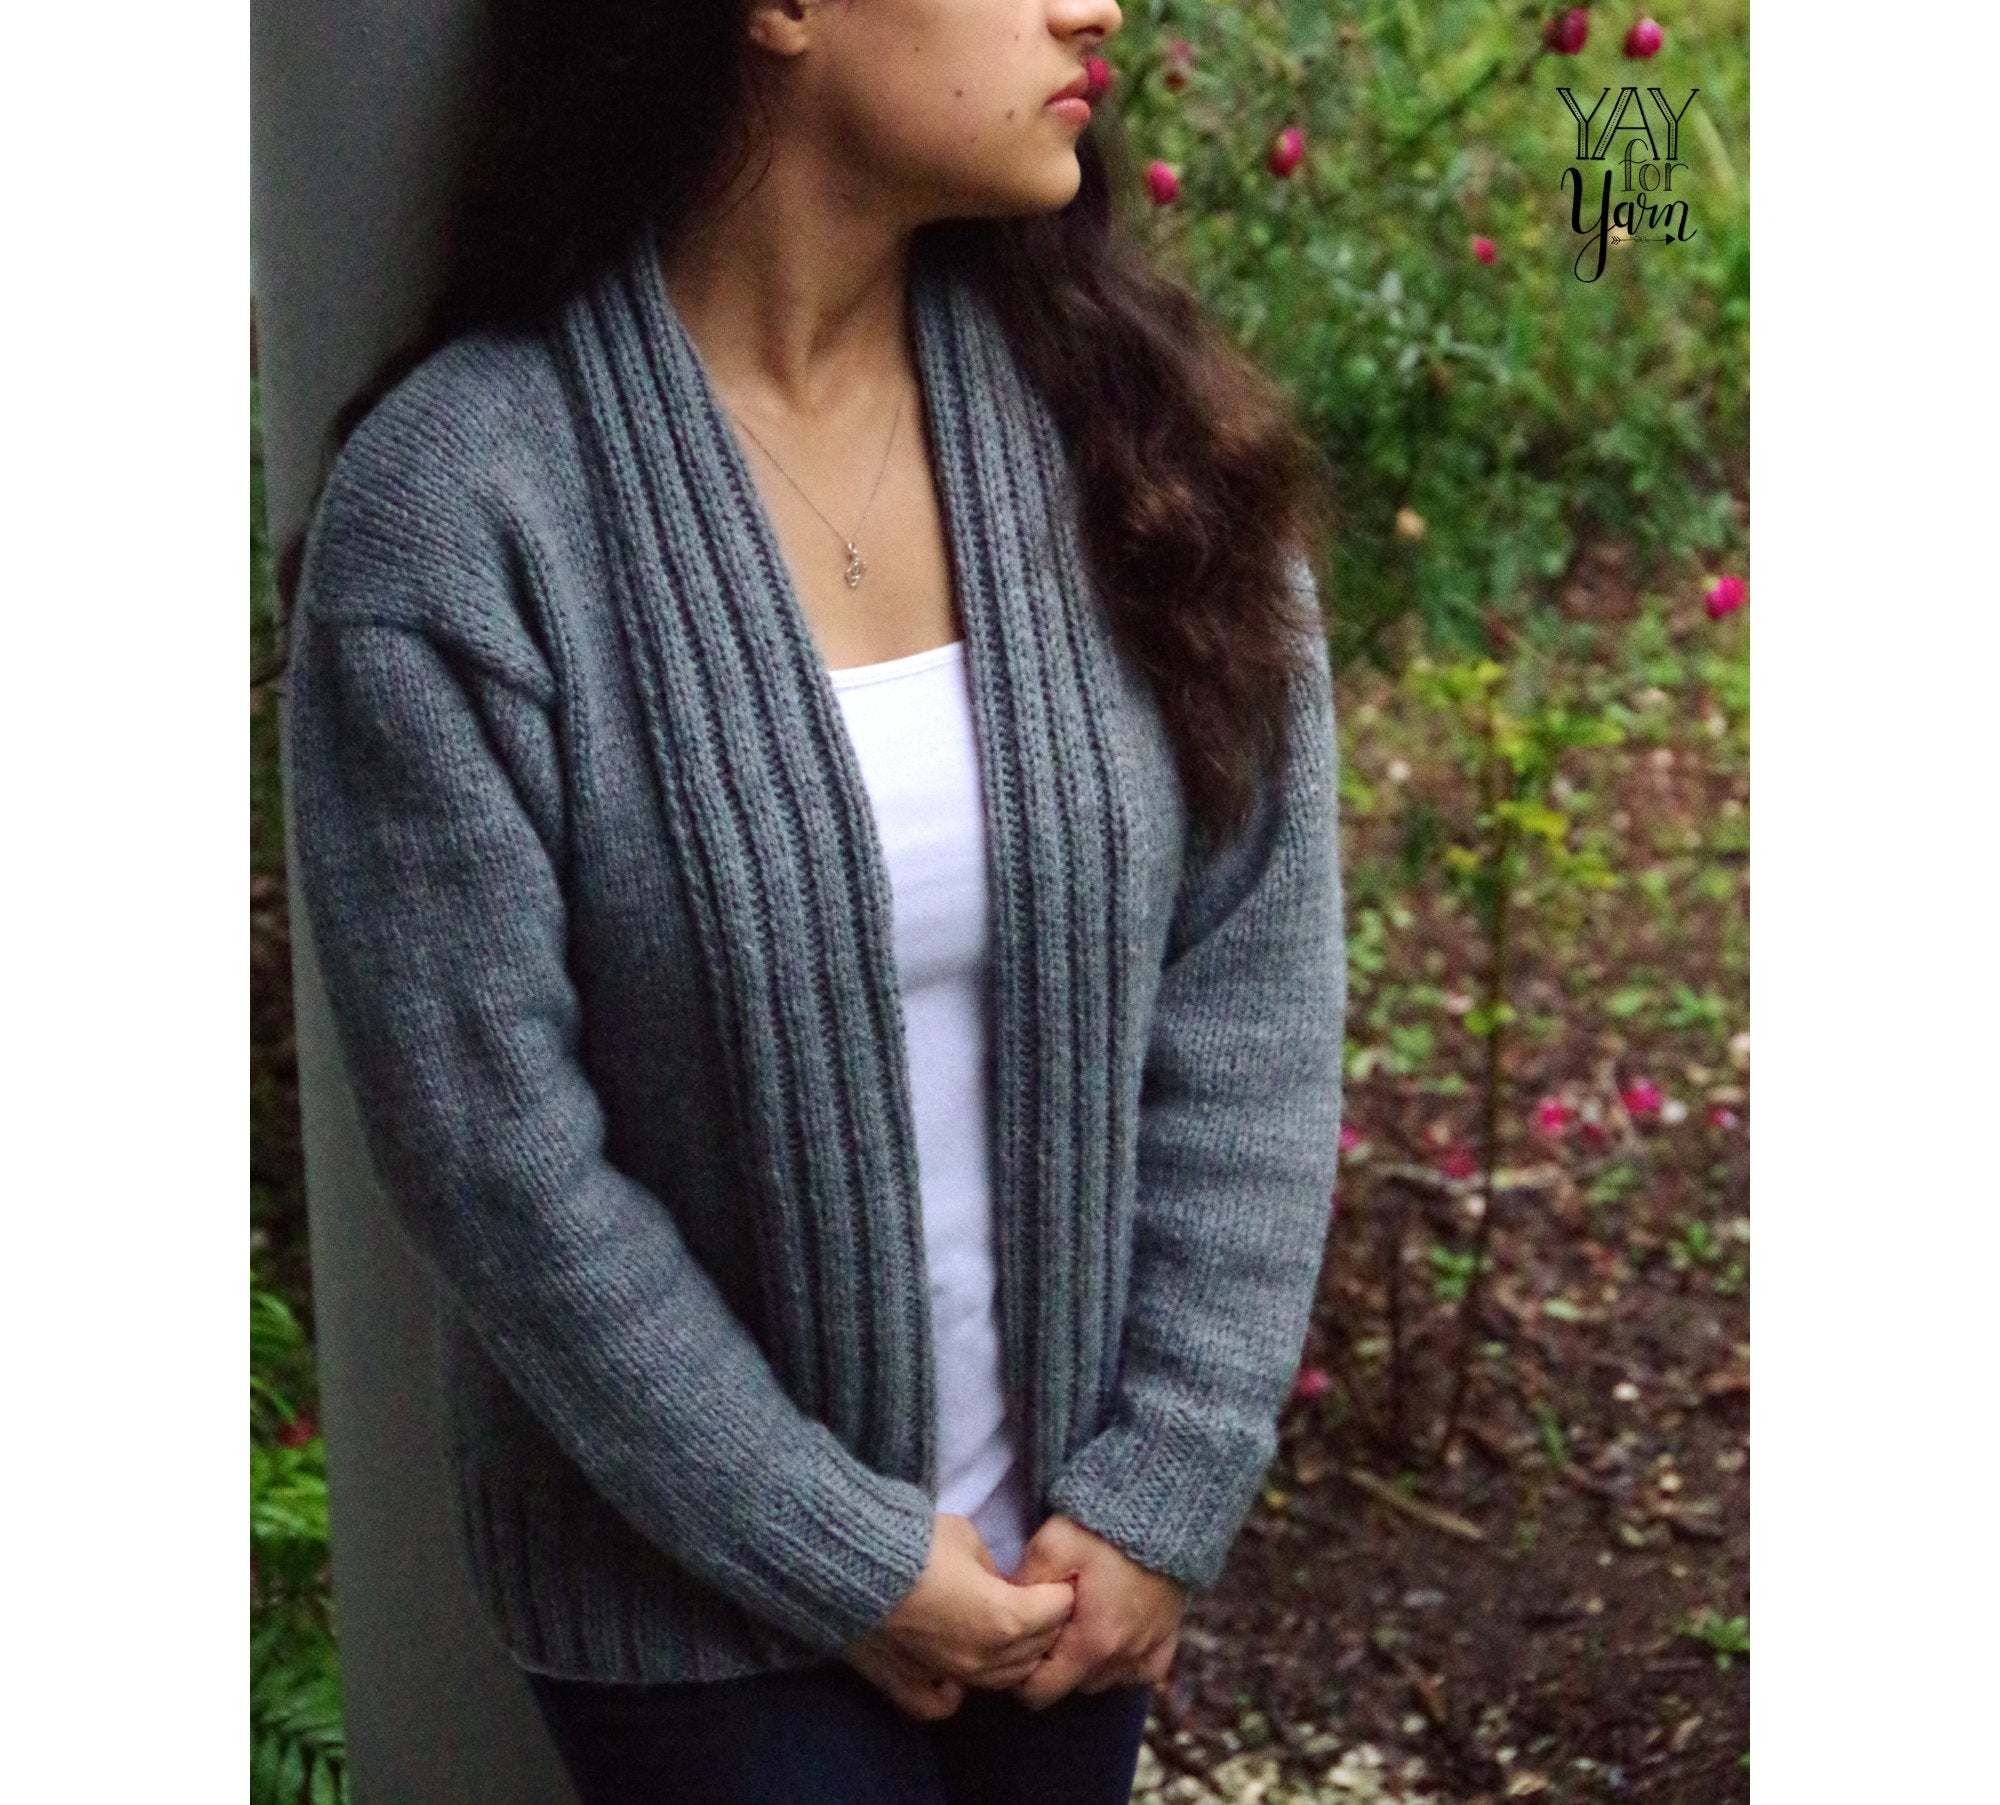 Free Plus Size Knitting Patterns Pdf Knitting Pattern Simple Slouchy Sweater Ladies Sizes X Small To 5x Knitted Cardigan Pattern For Confident Beginners Plus Size